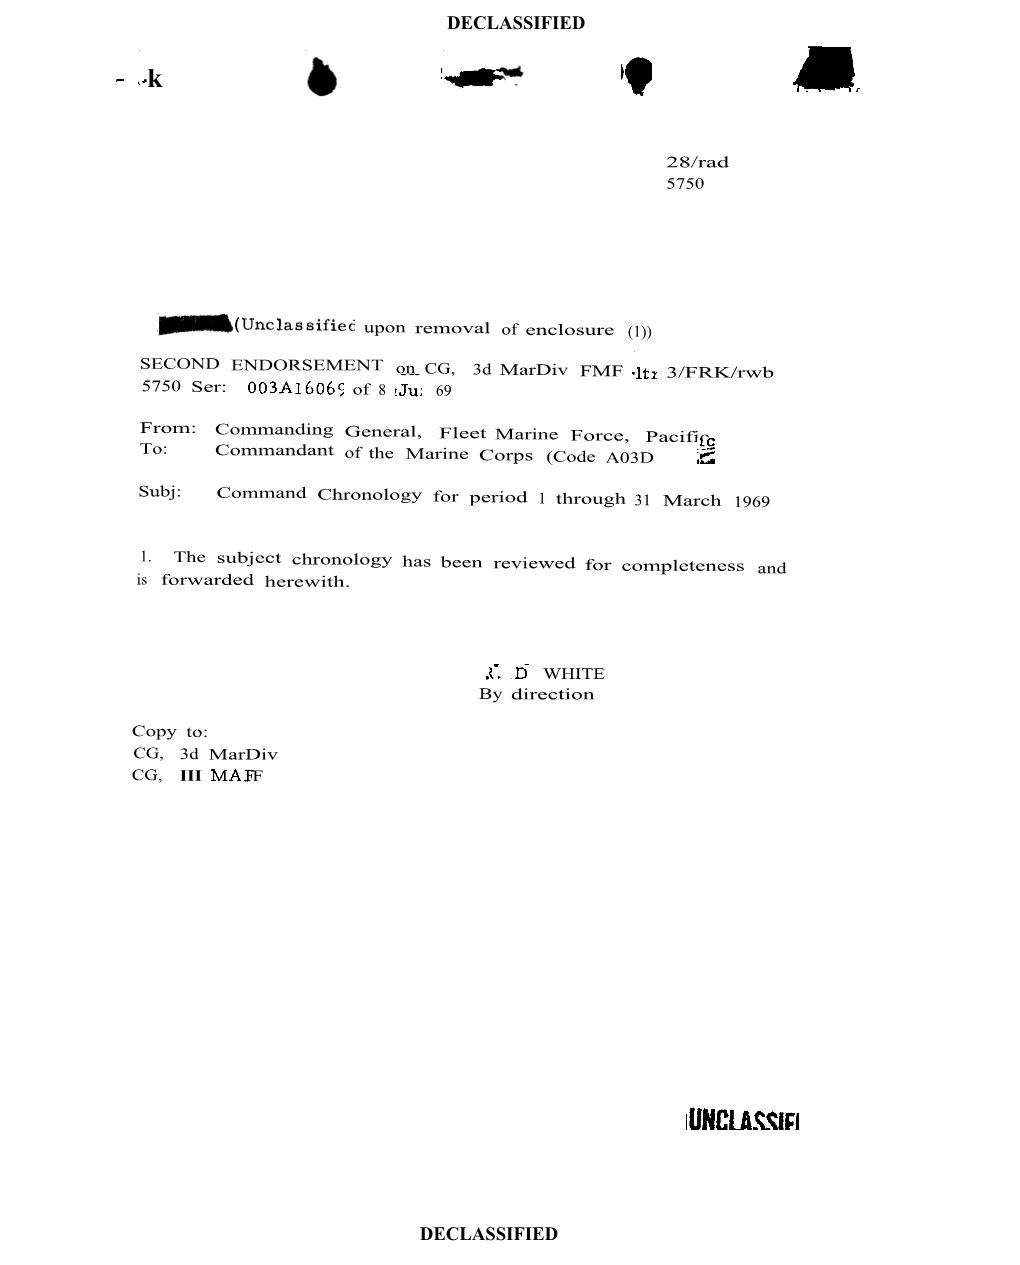 Unclassified Upon Removal of Enclosure (1))